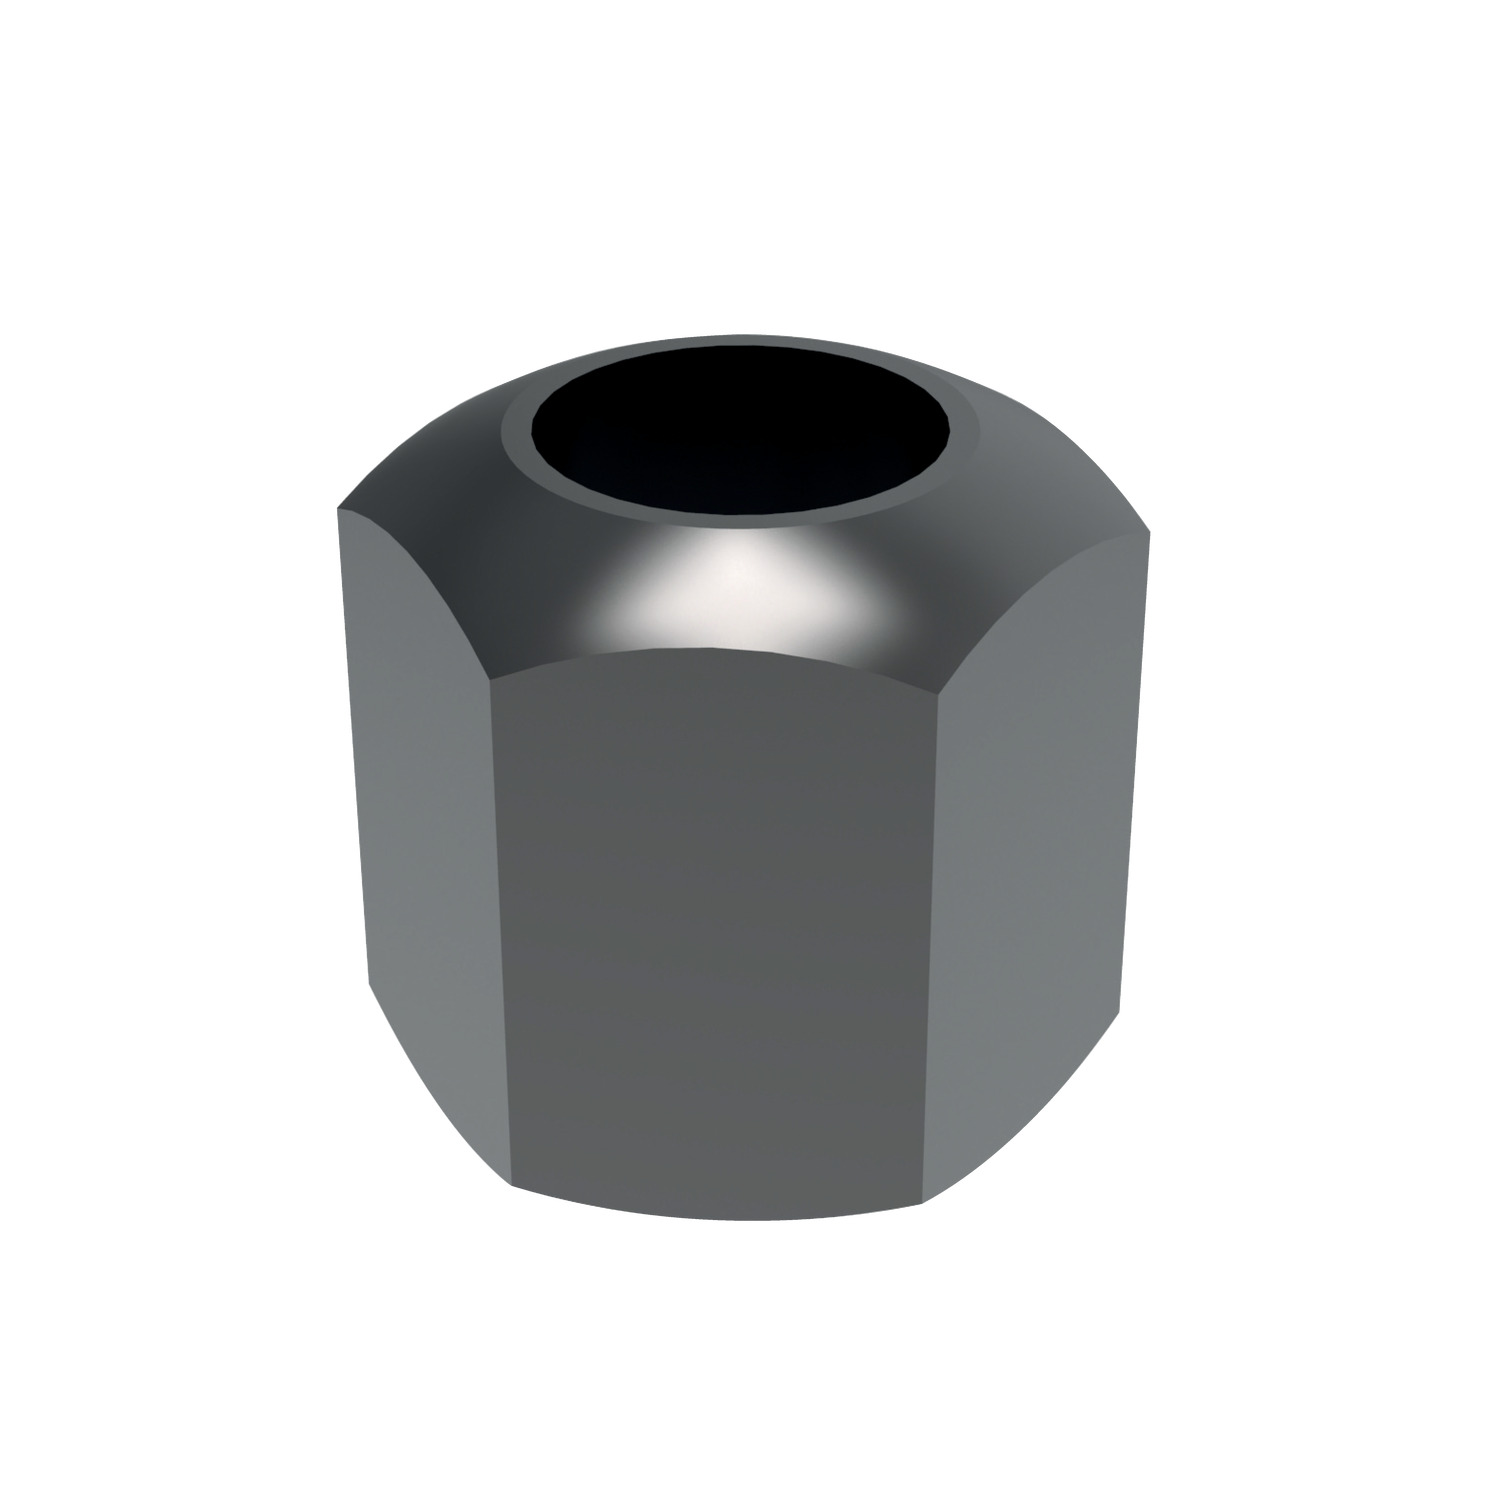 Fixture Nuts Strength class 10, heat treated fixture nuts made to din 508. Free CAD models are available for our fixture nut products.